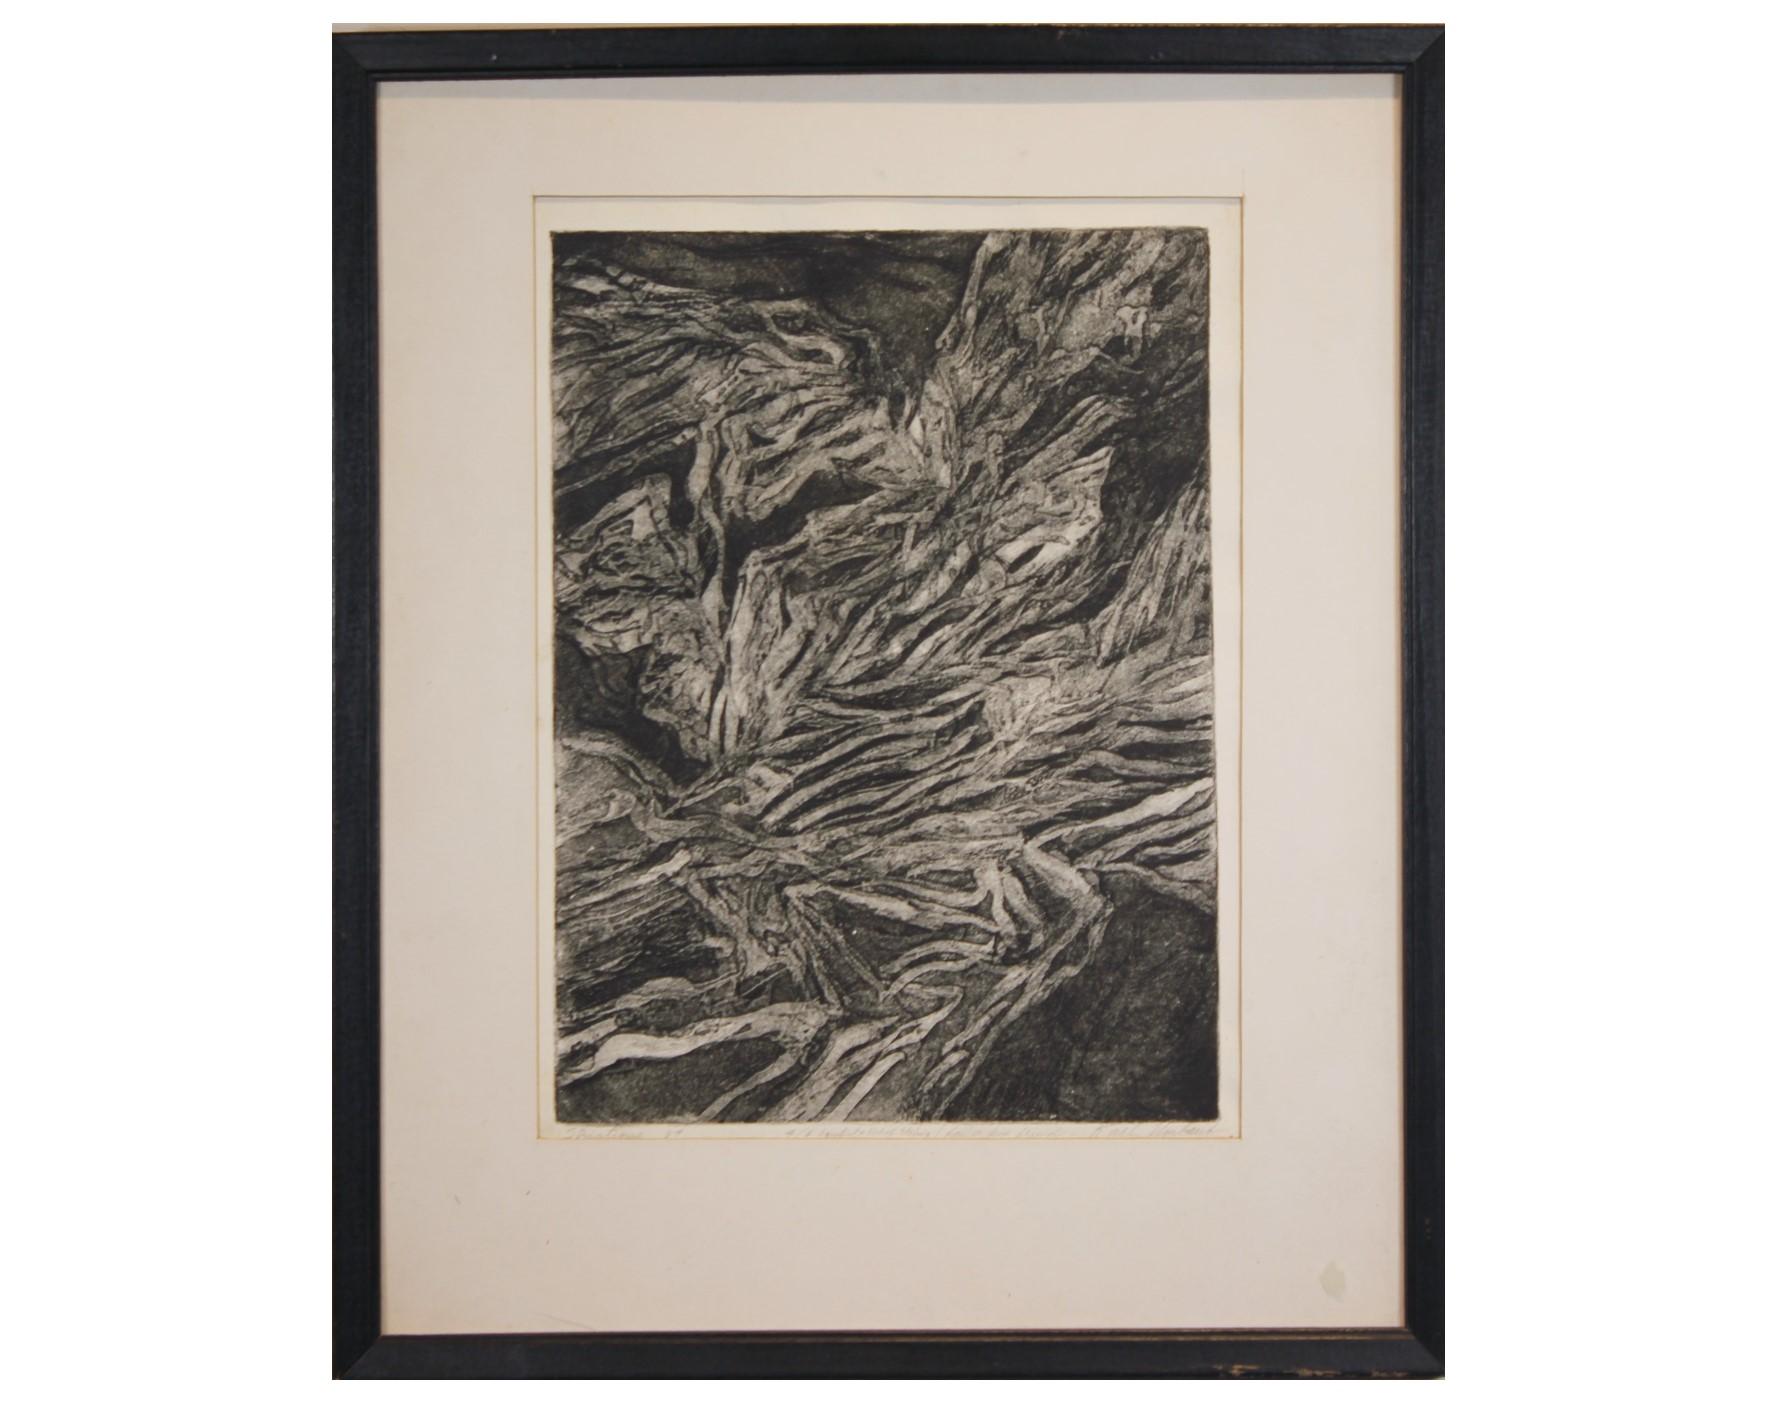 Karl Umlauf Abstract Print - "Striations" Abstract Expressionist Etching